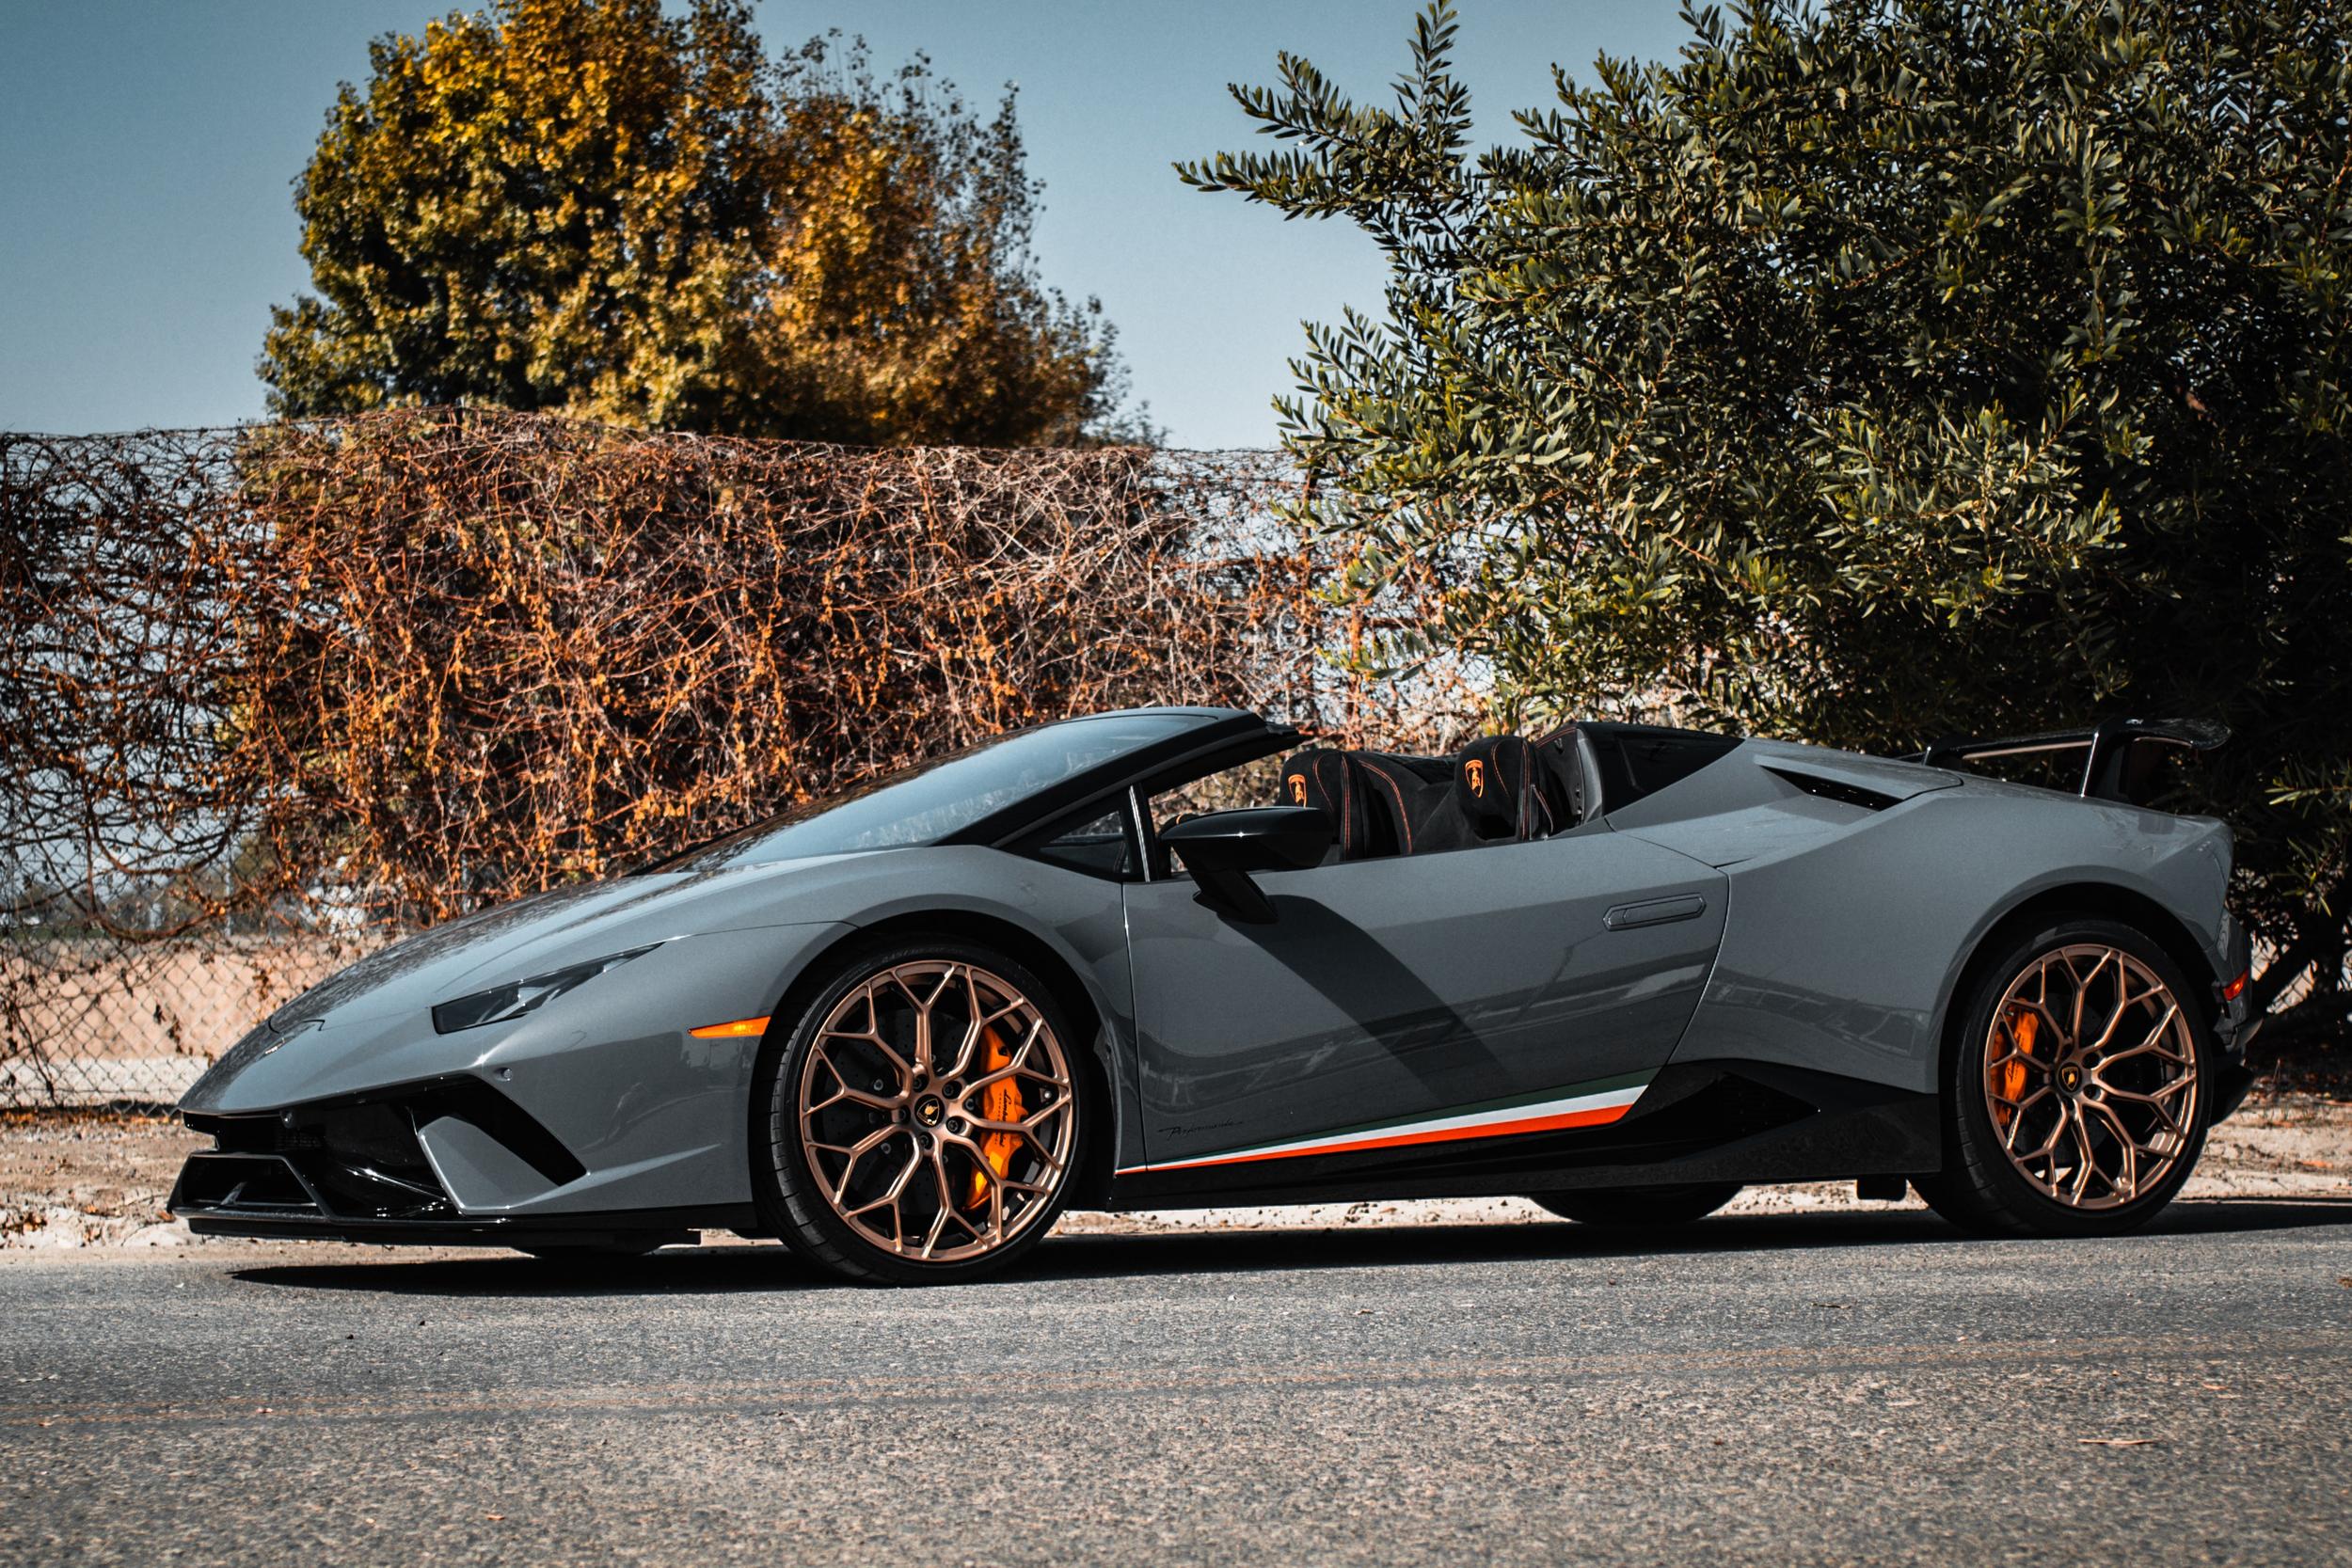 What is the lifespan of a lamborghini?